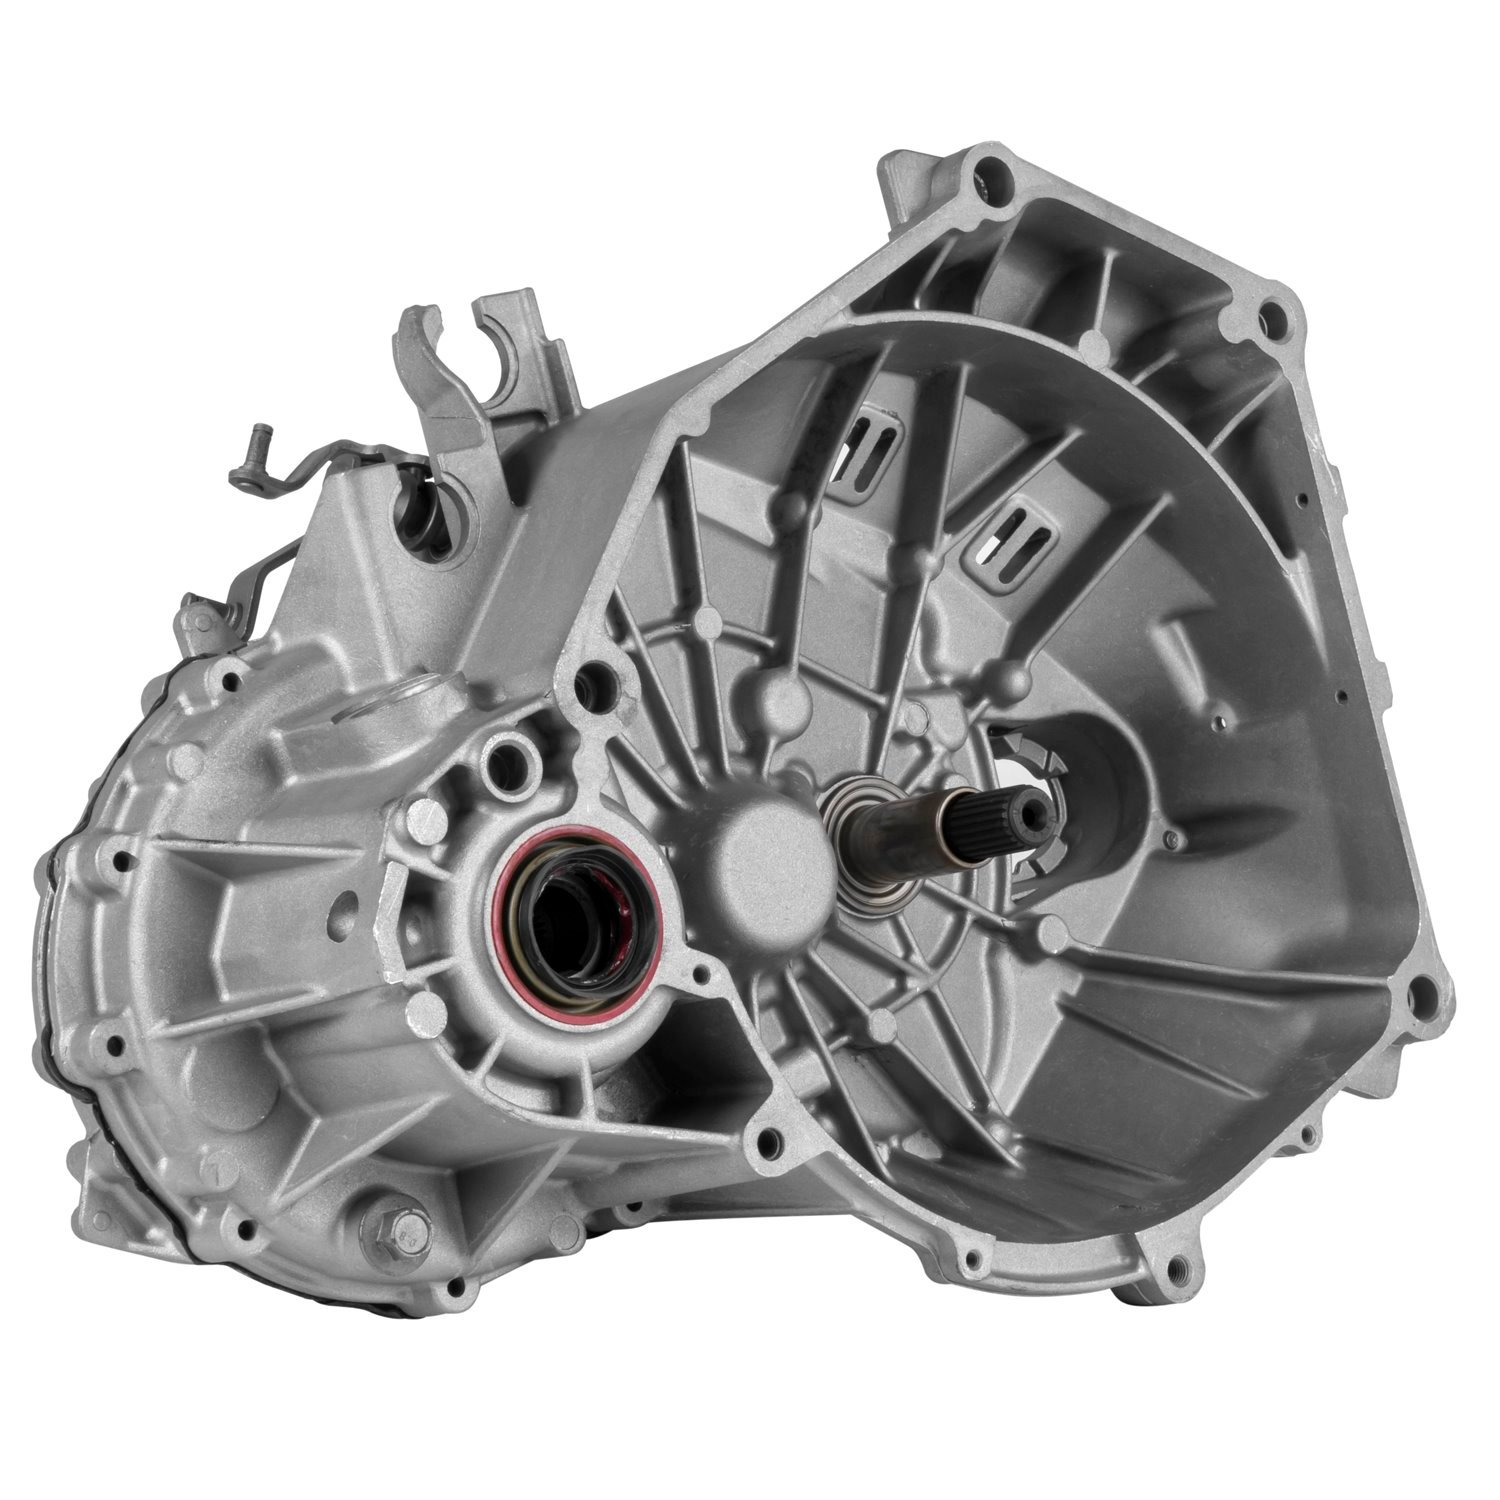 Remanufactured Manual Transmission for 1993-2001 Saturn S-Series